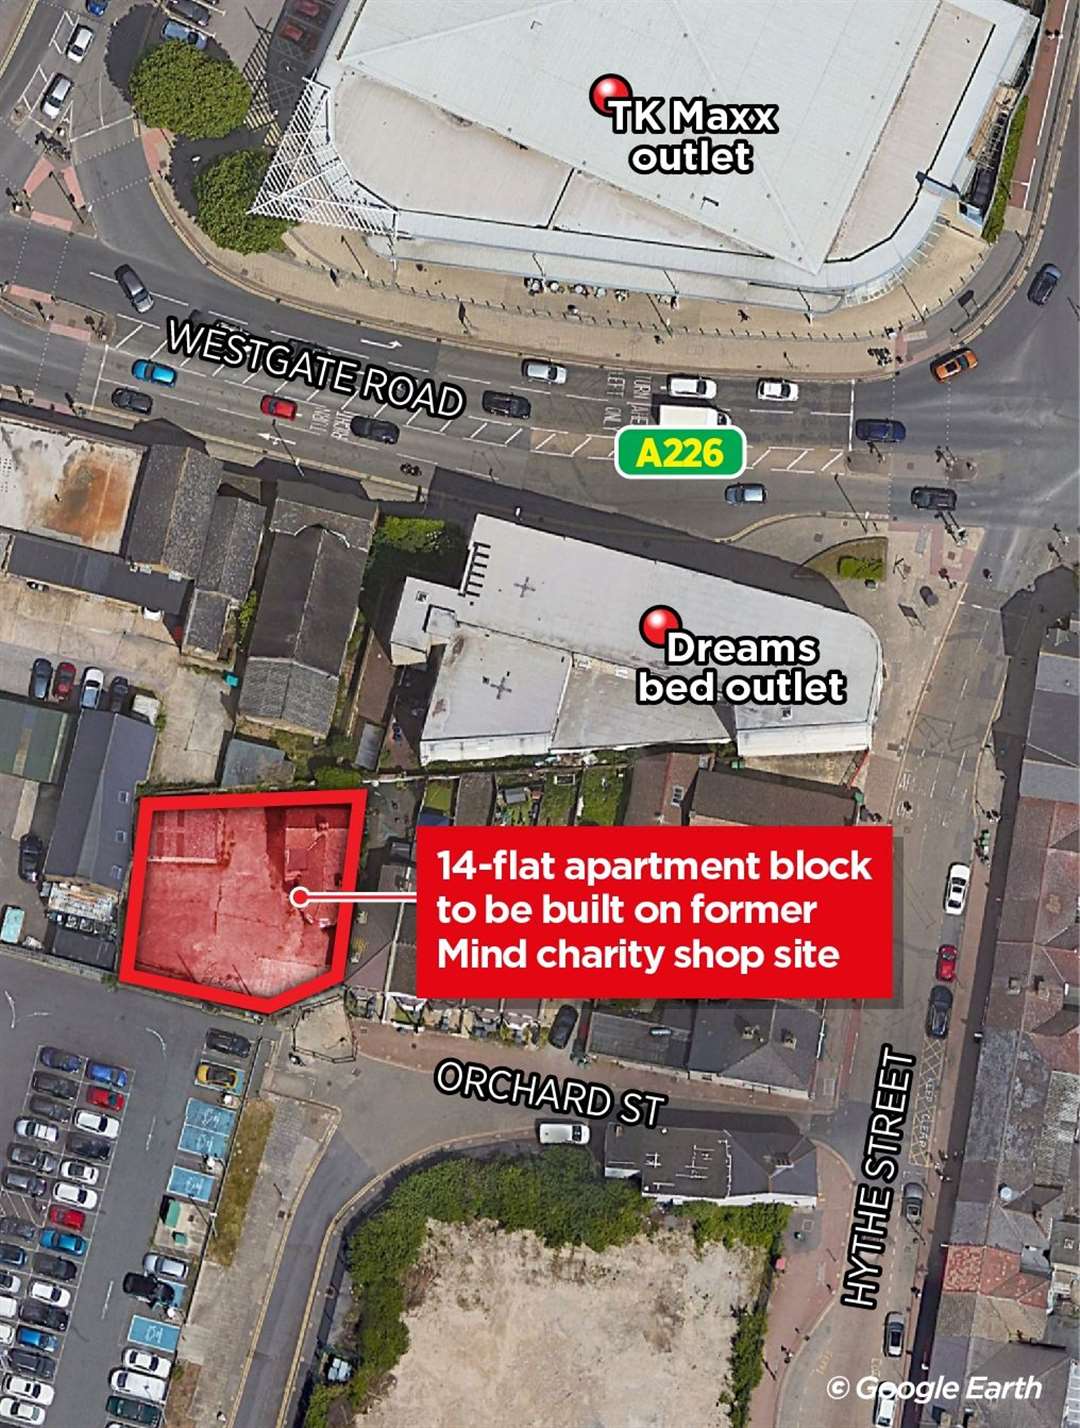 The apartment block will sit directly in front of retailers Dreams and TK Maxx